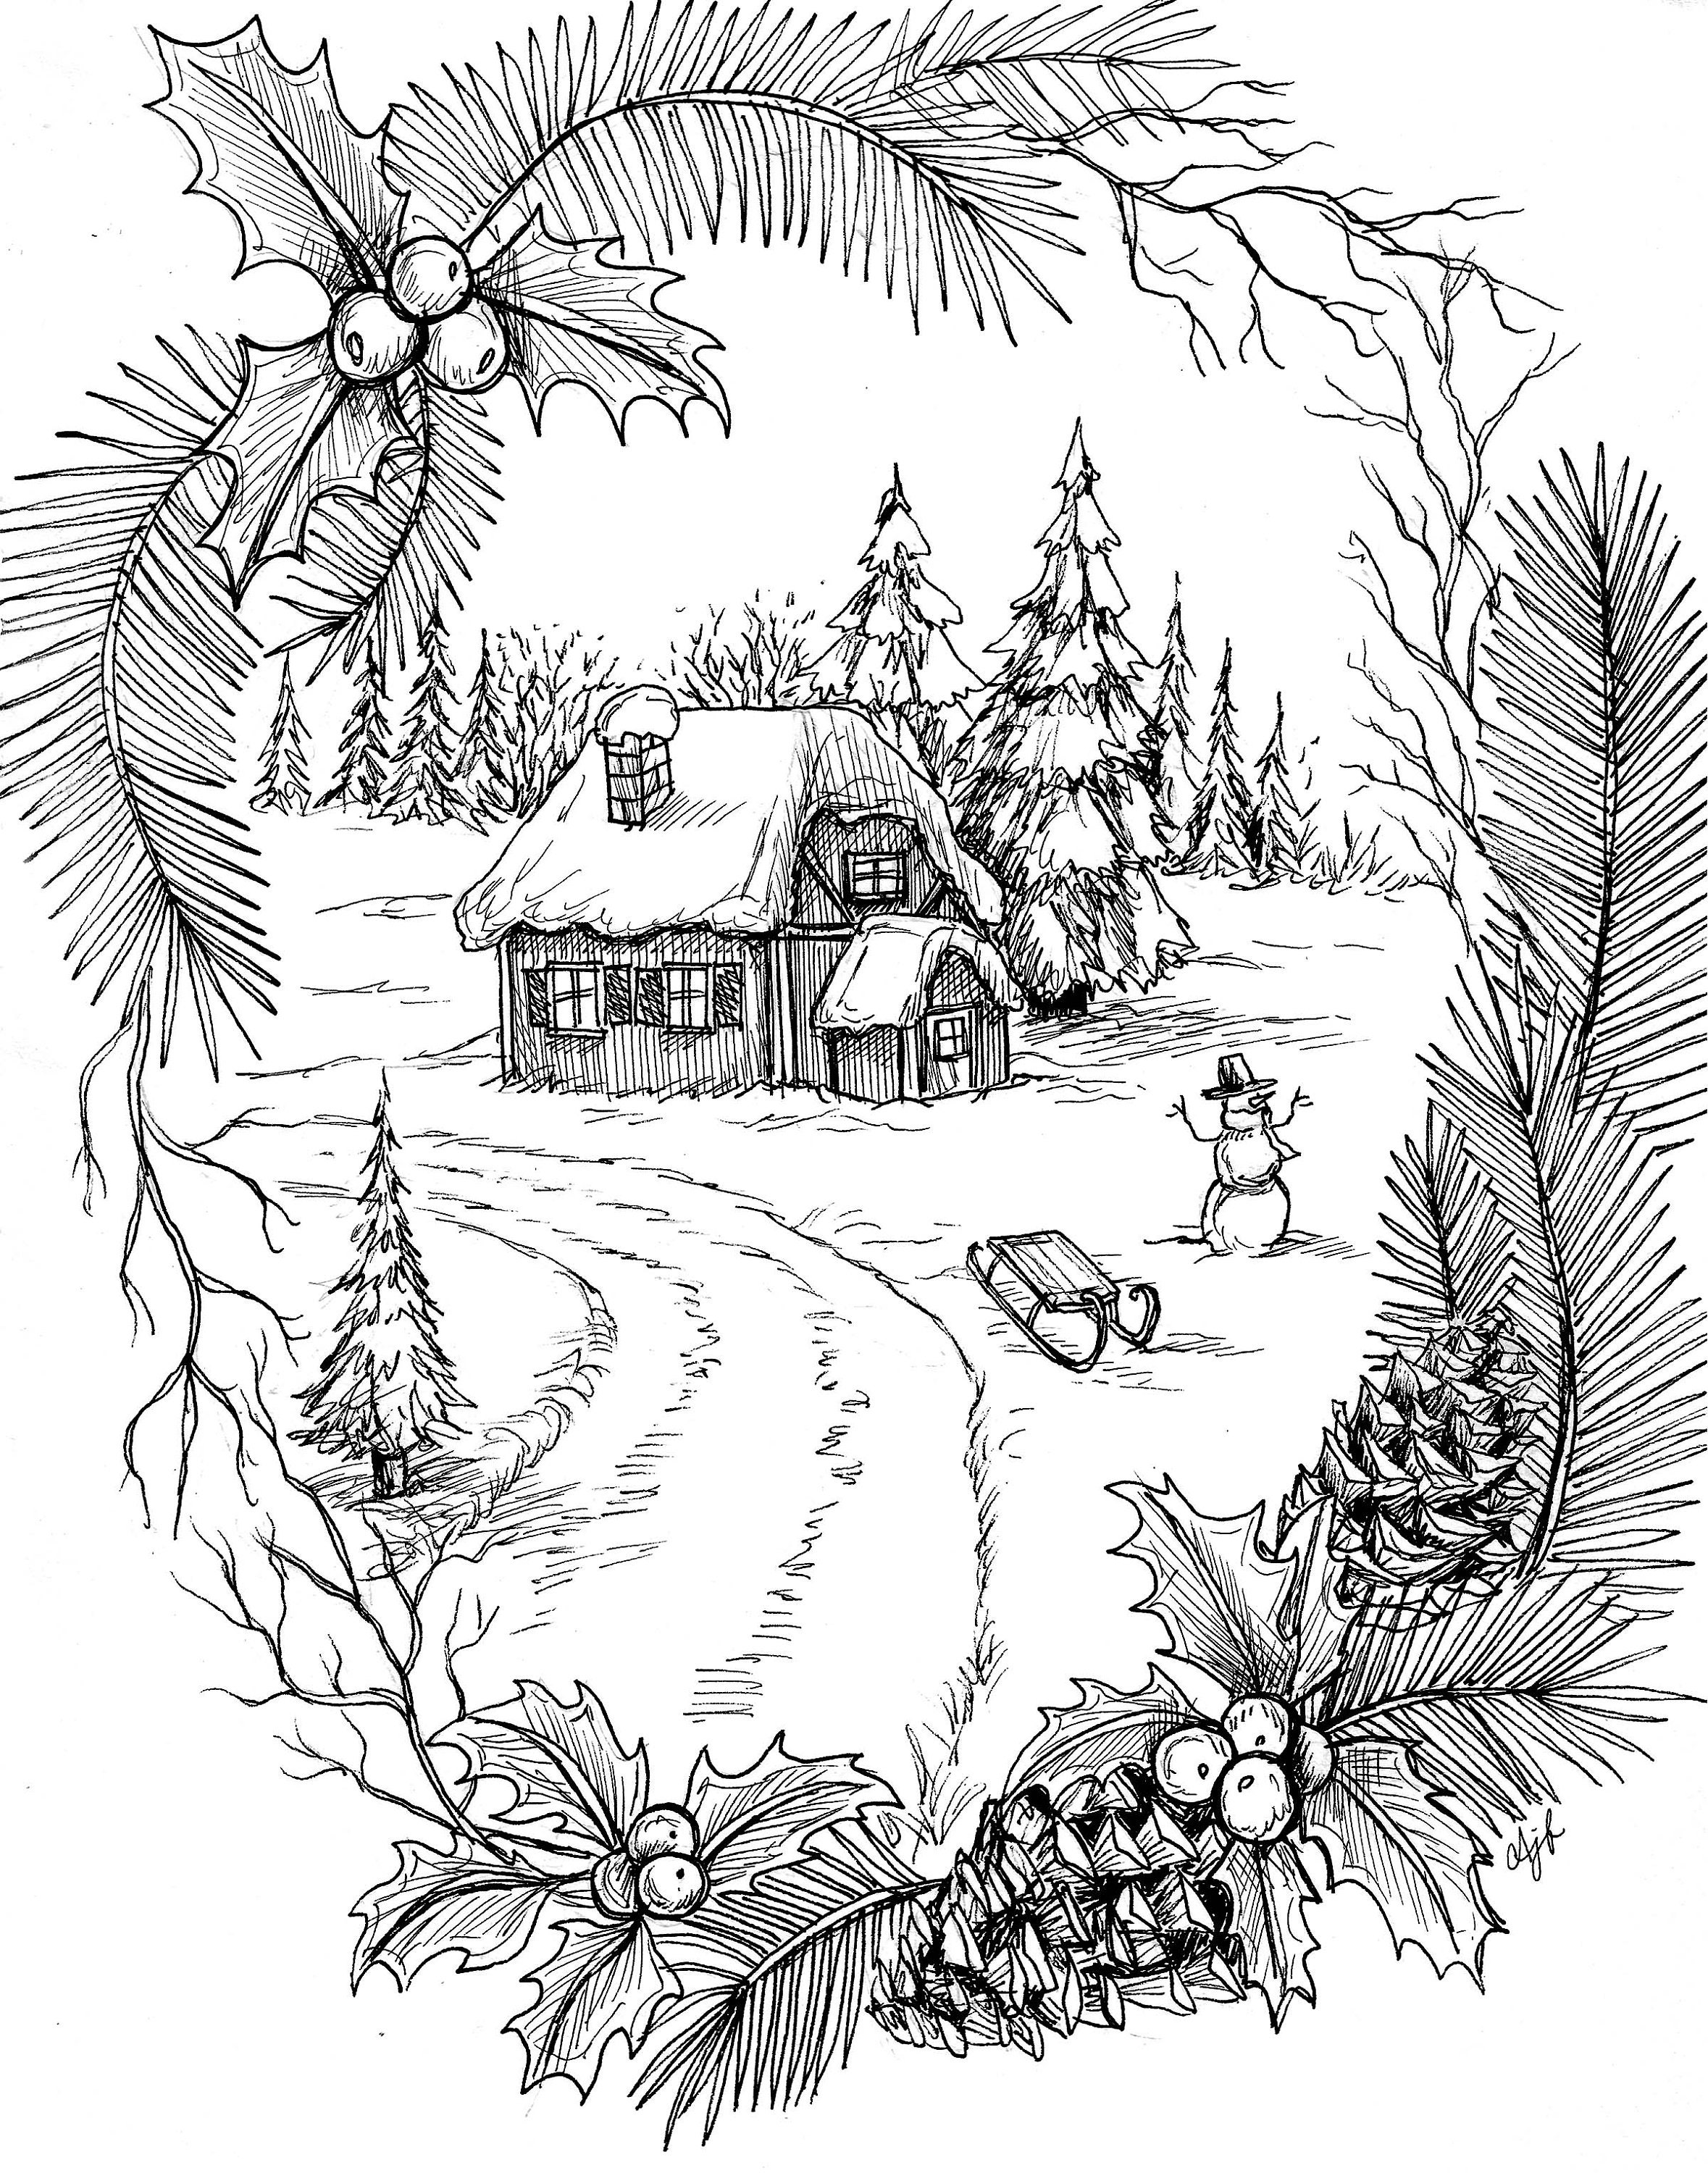 The Ultimate Winter Coloring Book: 101 Winter Scenes for Adults and  Seniors: A Holiday Coloring with Winter Landscapes, Winter Wonderlands and  More!